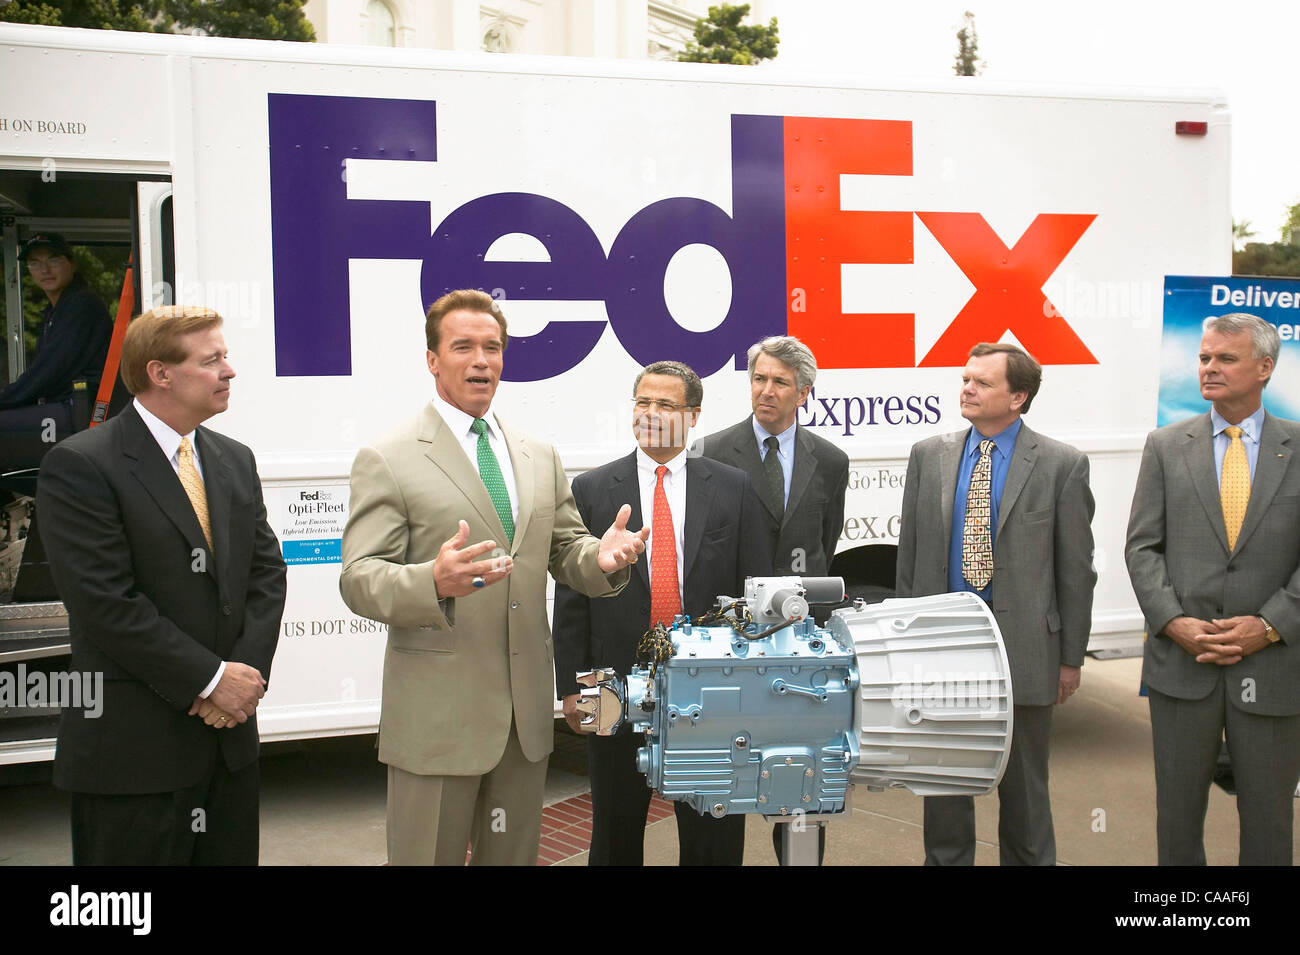 Mar 31, 2003; Sacramento, CA, USA; Environmental Defense, FedEx Express, and Eaton Corporation unveil new hybrid delivery trucks that emit 90% fewer emissions and go 50% further on a gallon of gas. (L to R: FedEx President and CEO David Bronczek, California Governor Arnold Schwarzenegger, Jim Sweetn Stock Photo